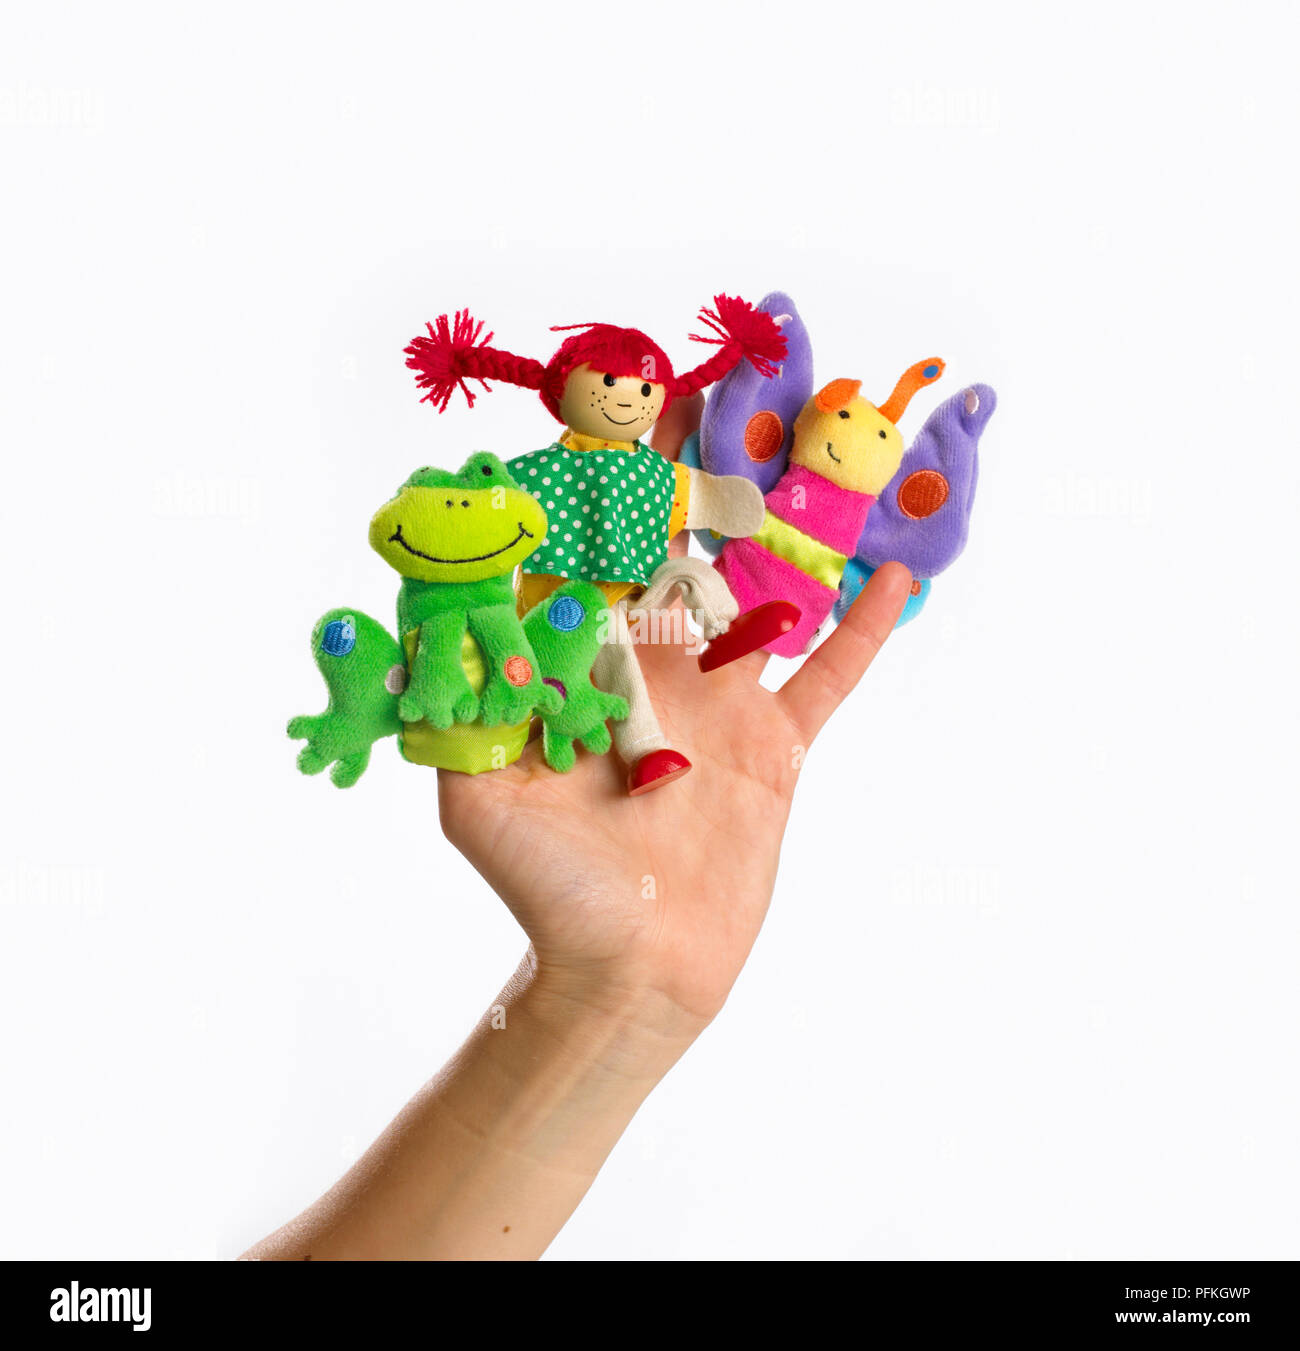 Five finger puppets on child's hand Stock Photo